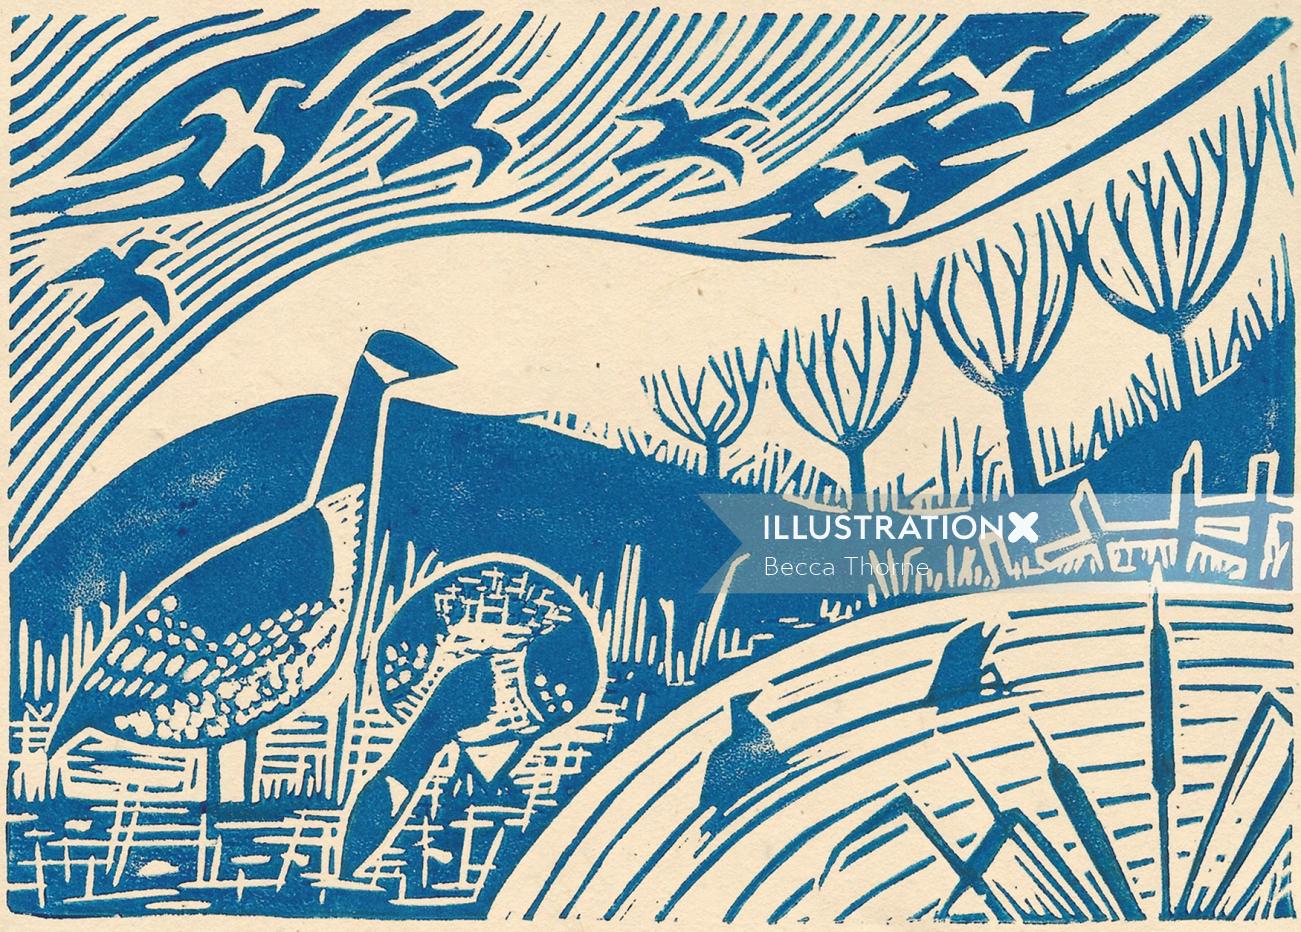 Blue and white linocut print of canada gees by a pond, with wintry trees in the background and styli